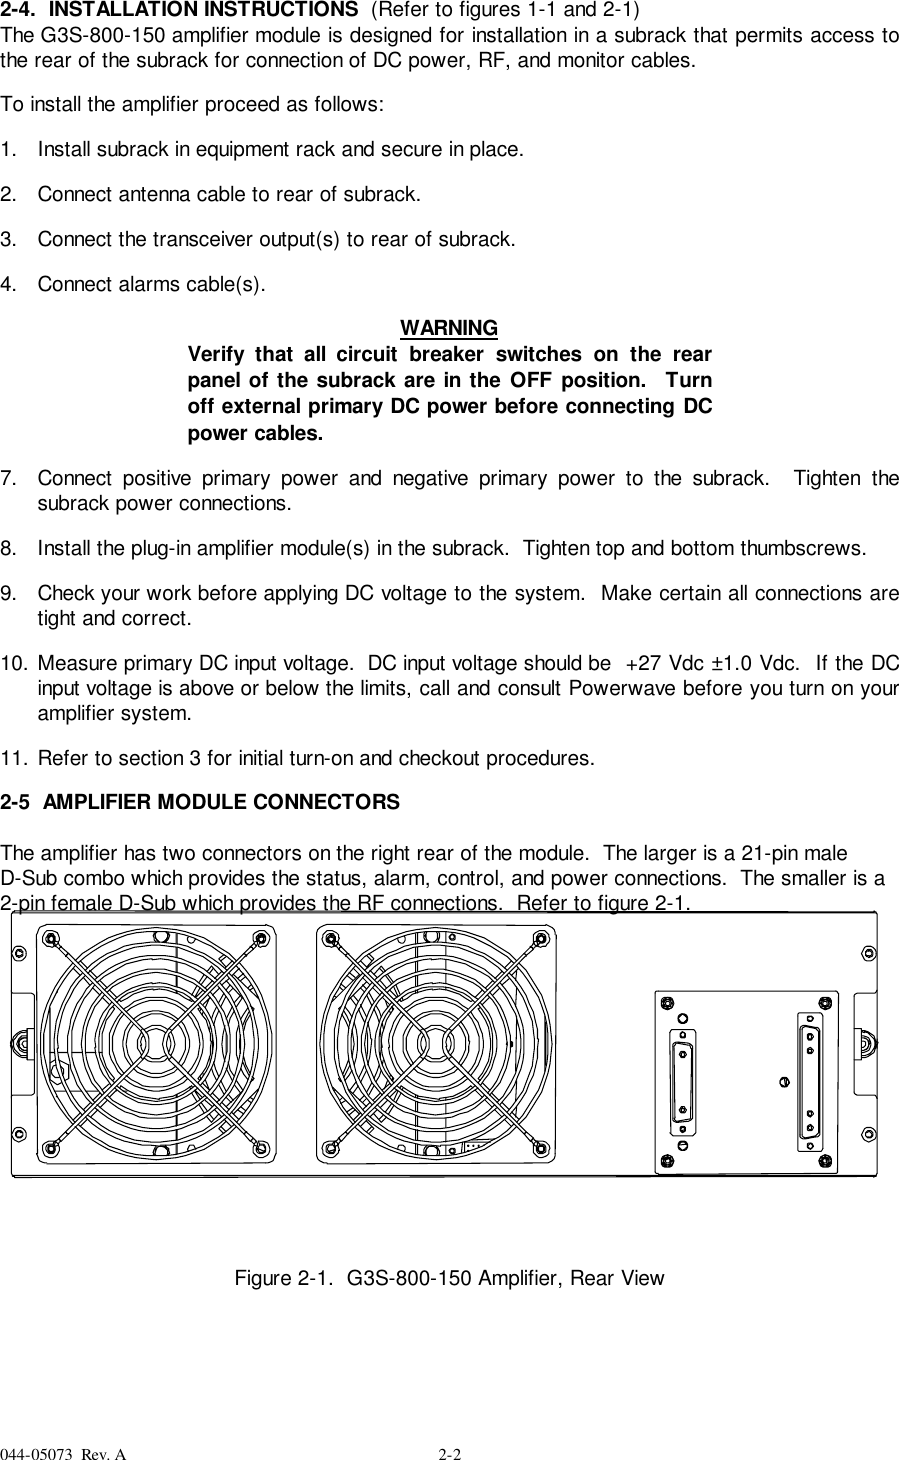 044-05073  Rev. A 2-22-4.  INSTALLATION INSTRUCTIONS  (Refer to figures 1-1 and 2-1)The G3S-800-150 amplifier module is designed for installation in a subrack that permits access tothe rear of the subrack for connection of DC power, RF, and monitor cables.To install the amplifier proceed as follows:1.  Install subrack in equipment rack and secure in place. 2.  Connect antenna cable to rear of subrack. 3.  Connect the transceiver output(s) to rear of subrack. 4.  Connect alarms cable(s). WARNINGVerify that all circuit breaker switches on the rearpanel of the subrack are in the OFF position.  Turnoff external primary DC power before connecting DCpower cables. 7.  Connect positive primary power and negative primary power to the subrack.  Tighten thesubrack power connections.8.  Install the plug-in amplifier module(s) in the subrack.  Tighten top and bottom thumbscrews. 9.  Check your work before applying DC voltage to the system.  Make certain all connections aretight and correct. 10. Measure primary DC input voltage.  DC input voltage should be  +27 Vdc ±1.0 Vdc.  If the DCinput voltage is above or below the limits, call and consult Powerwave before you turn on youramplifier system. 11. Refer to section 3 for initial turn-on and checkout procedures.2-5  AMPLIFIER MODULE CONNECTORSThe amplifier has two connectors on the right rear of the module.  The larger is a 21-pin maleD-Sub combo which provides the status, alarm, control, and power connections.  The smaller is a2-pin female D-Sub which provides the RF connections.  Refer to figure 2-1.Figure 2-1.  G3S-800-150 Amplifier, Rear View